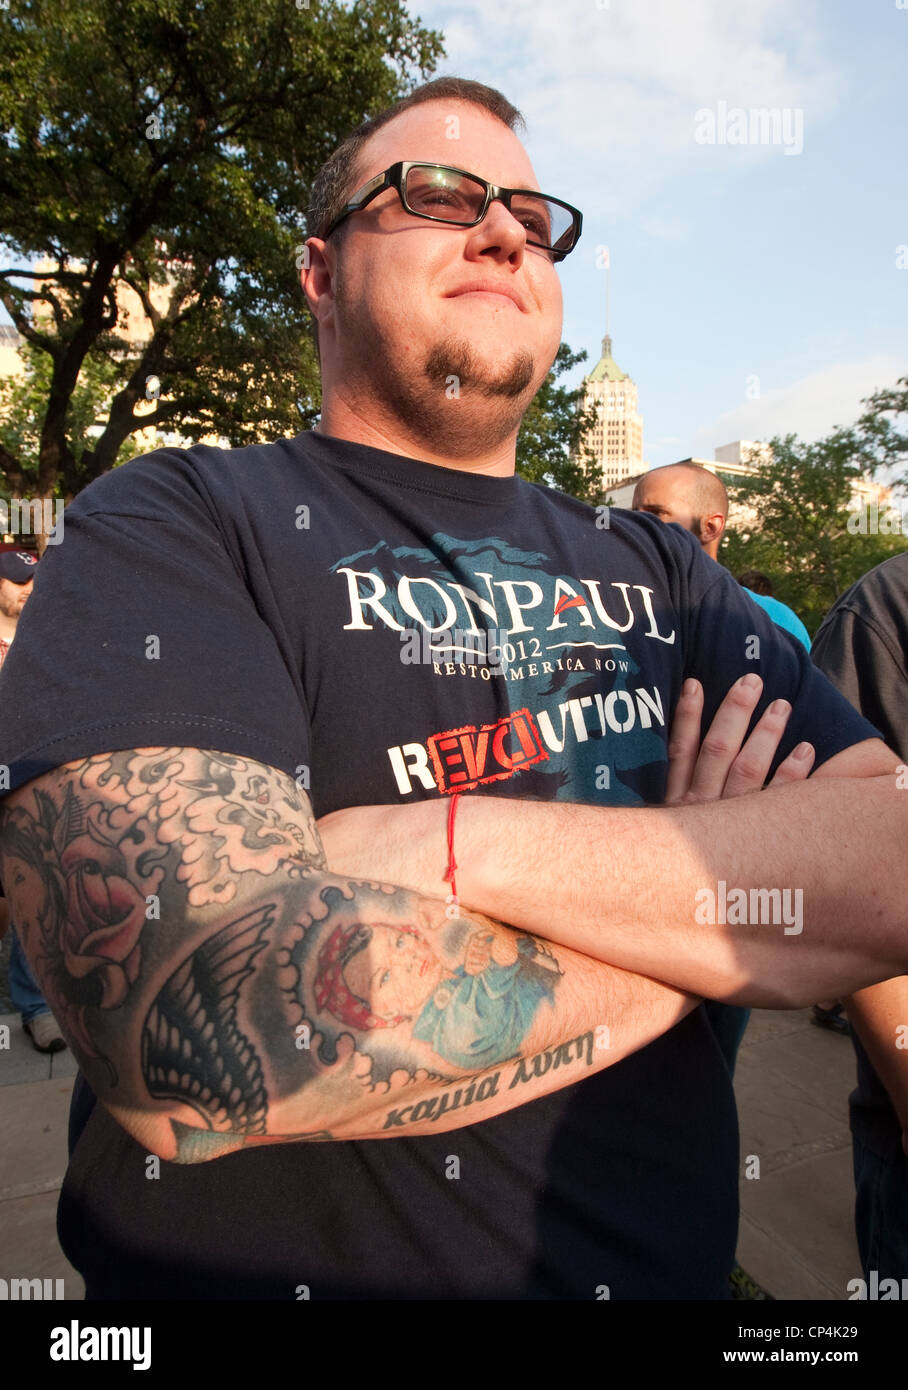 Anglo male with tattoos wears Ron Paul t-shirt at campaign rally in San Antonio, Texas Stock Photo